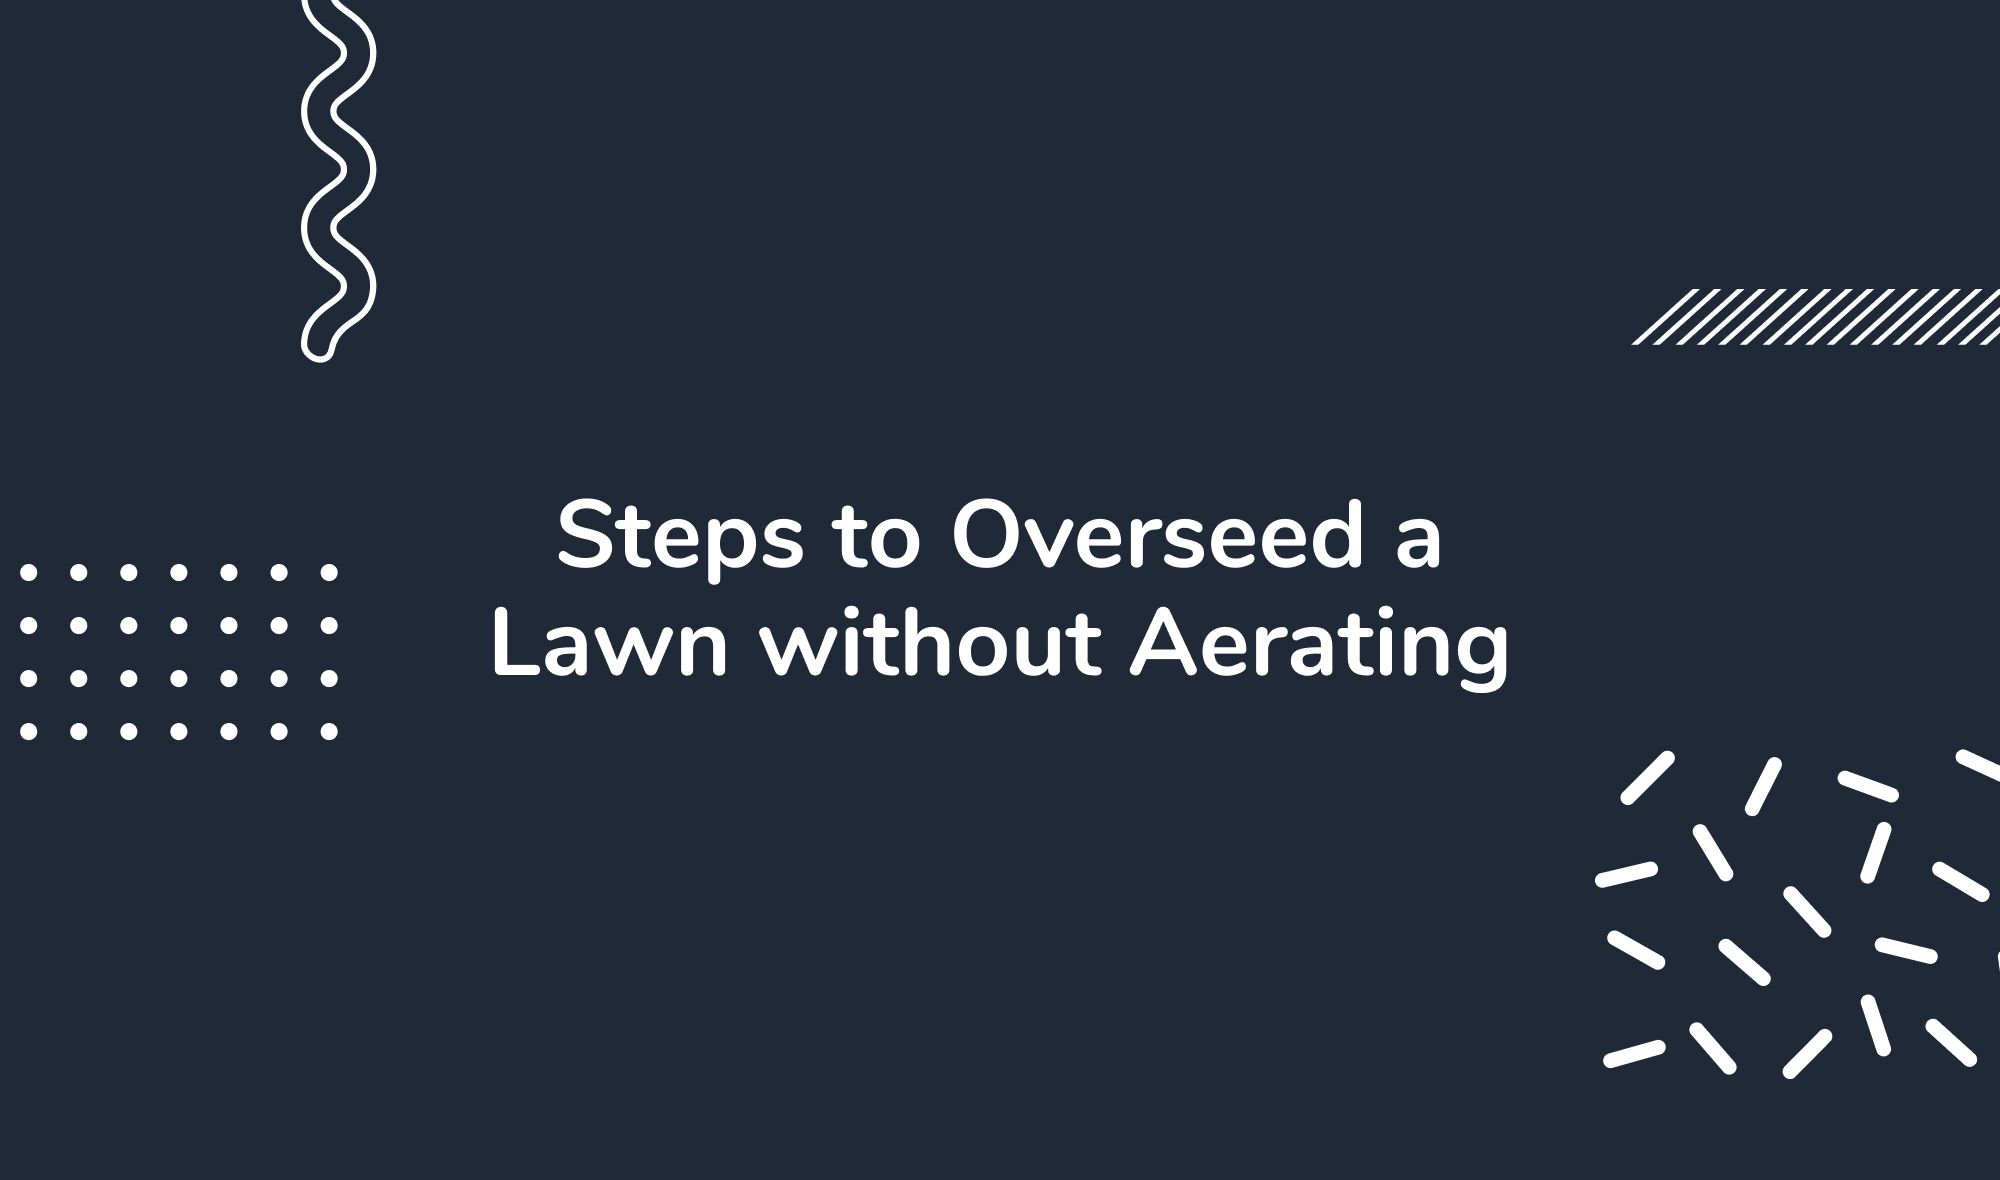 Steps to Overseed a Lawn without Aerating